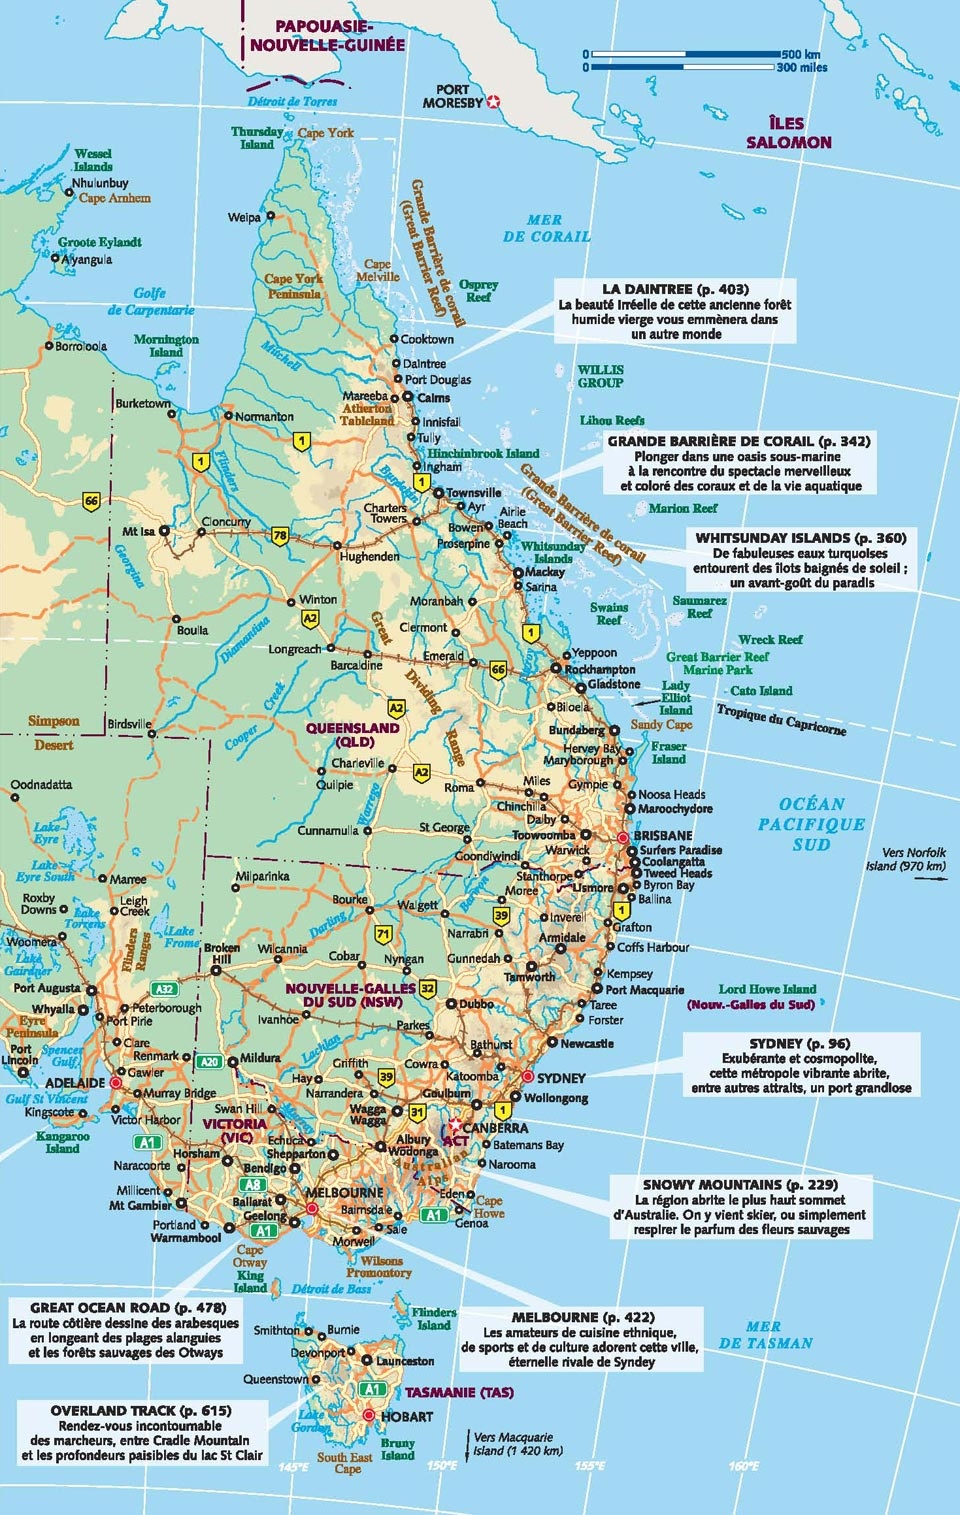 Map of eastern Australia with comments on interesting places.